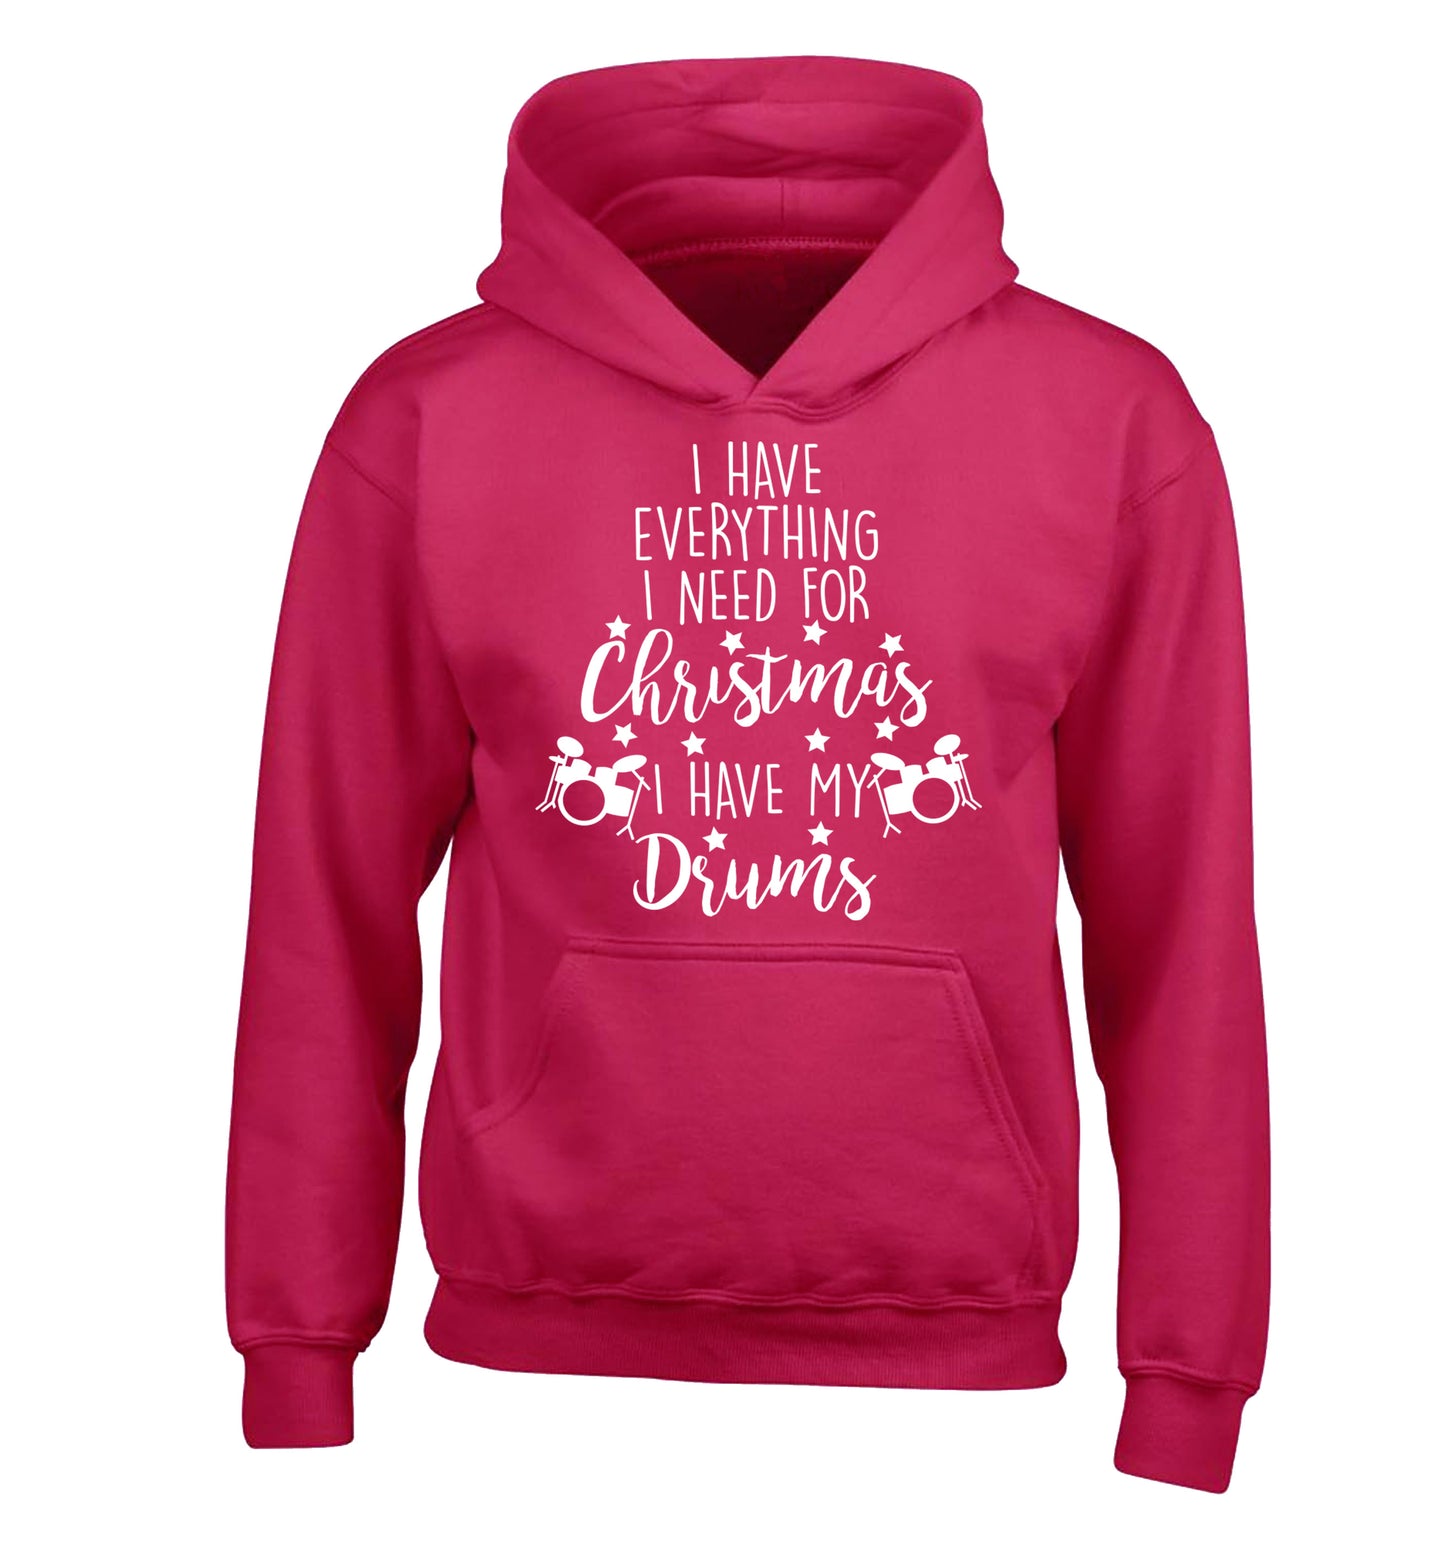 I have everything I need for Christmas I have my drums! children's pink hoodie 12-14 Years